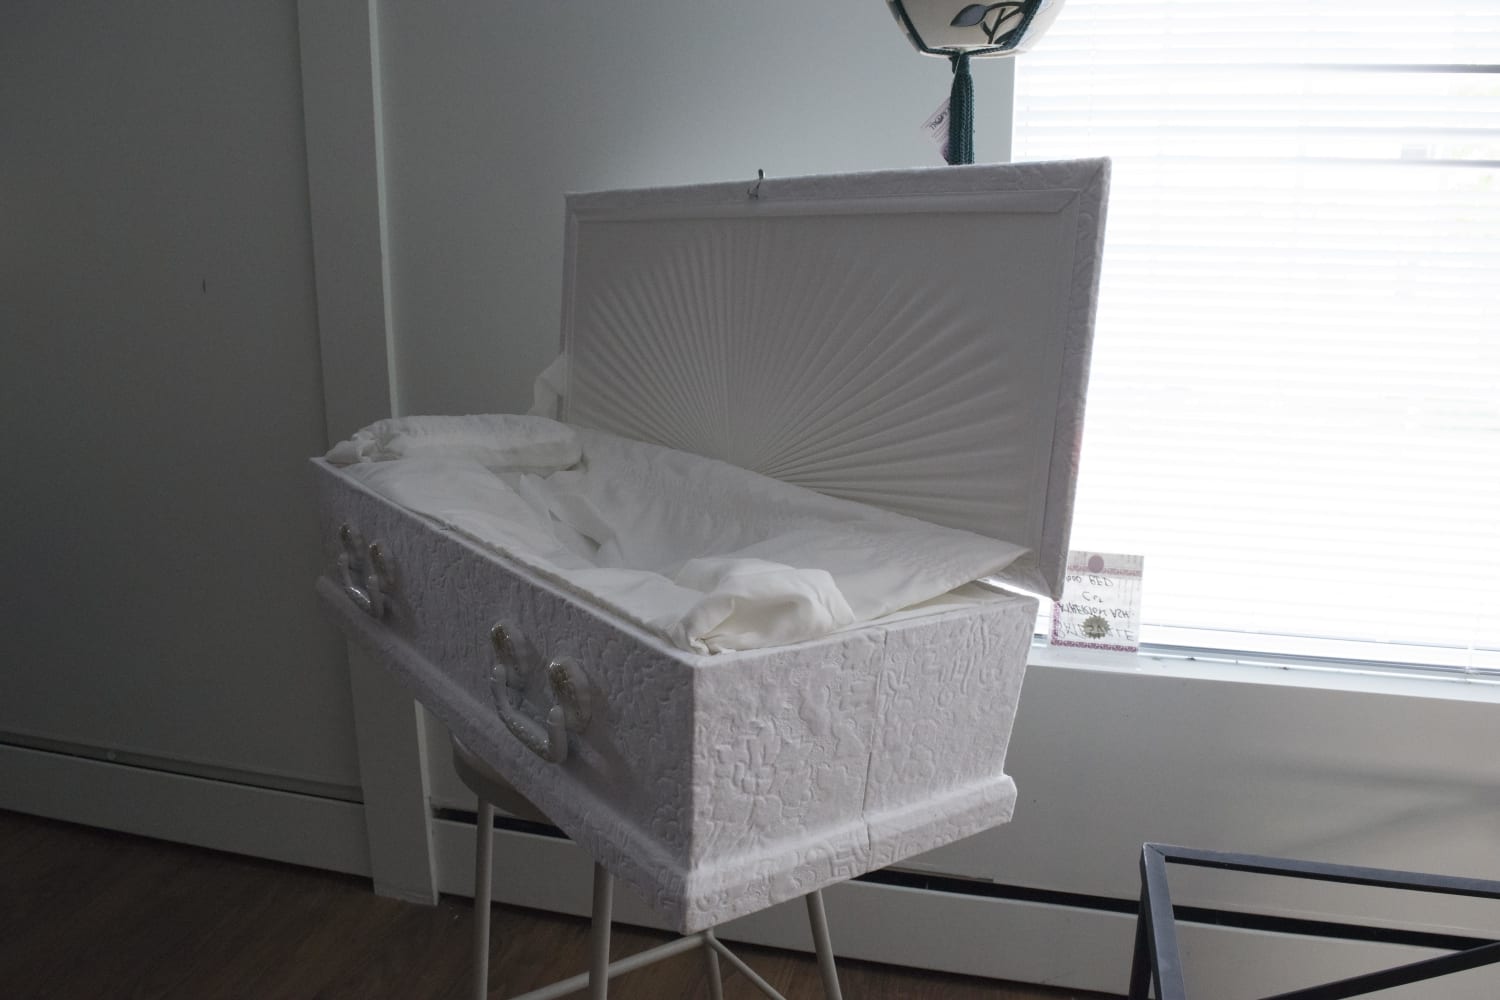 Child's Coffin in an Abandoned Funeral Home (Niagara Falls, Ontario)